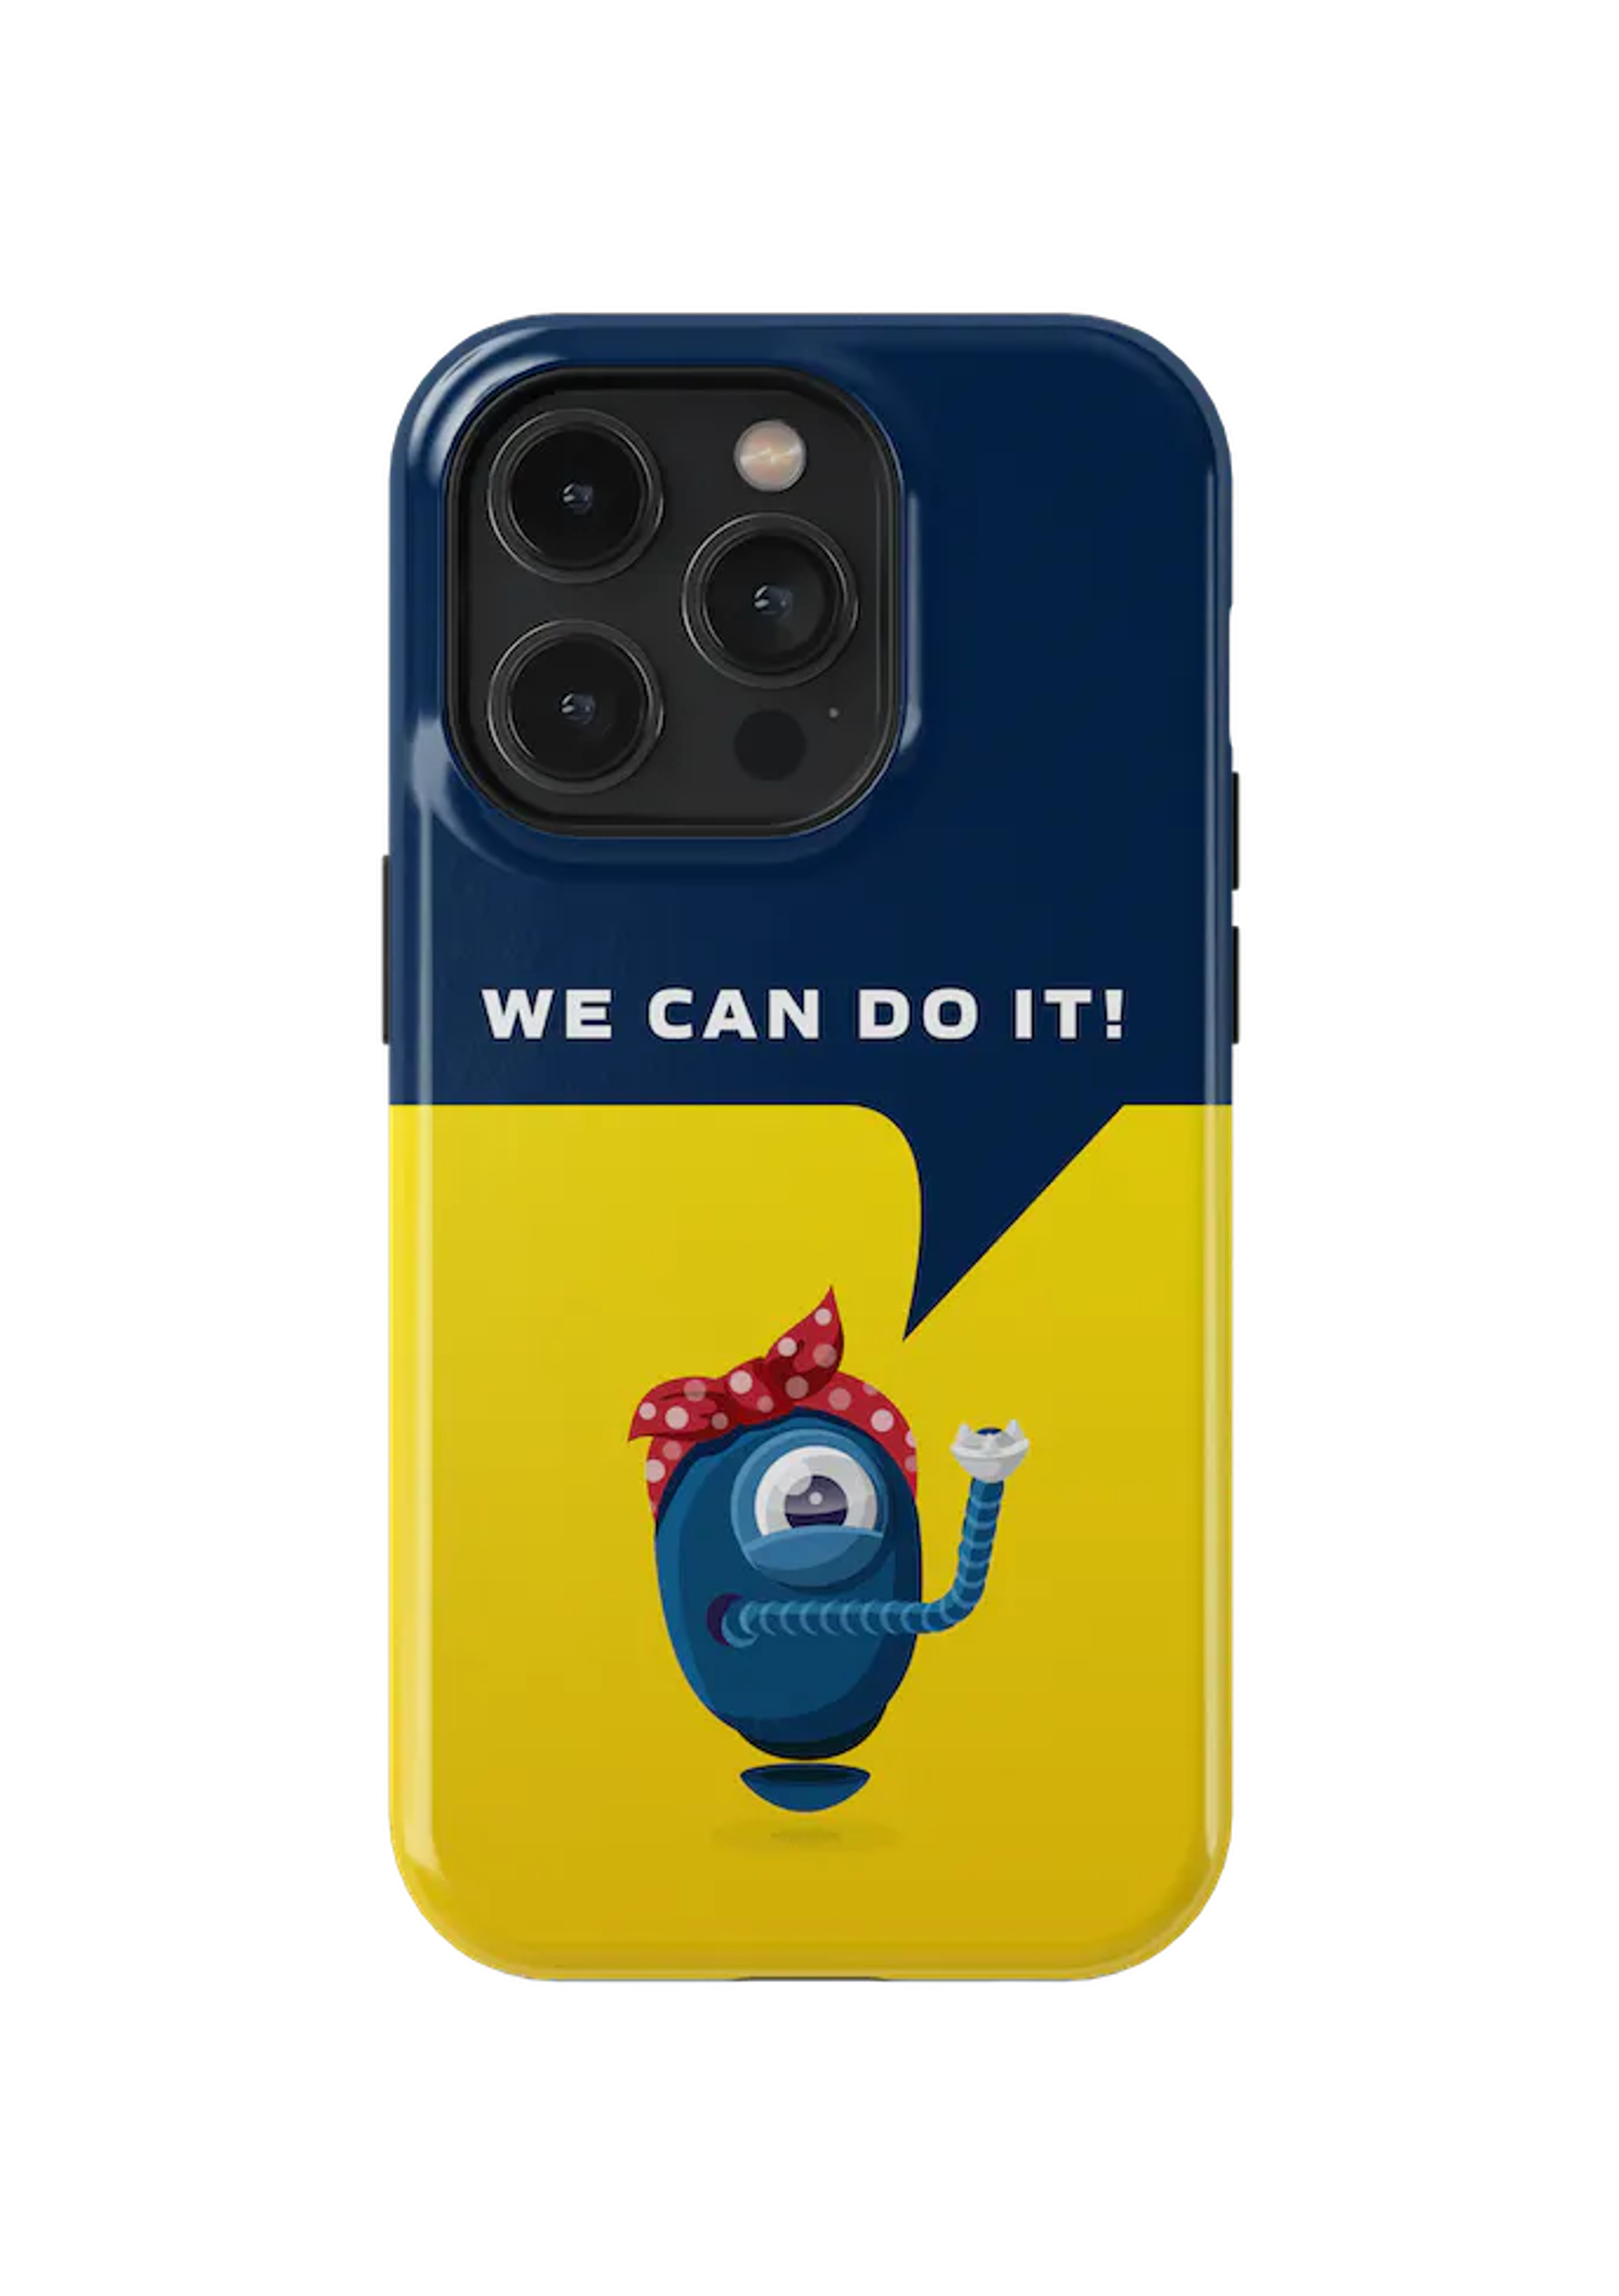 Phone case featuring Rosie the Resistbot on a yellow background, with "we can do it" text above in the style of the famous Rosie the Riveter poster.